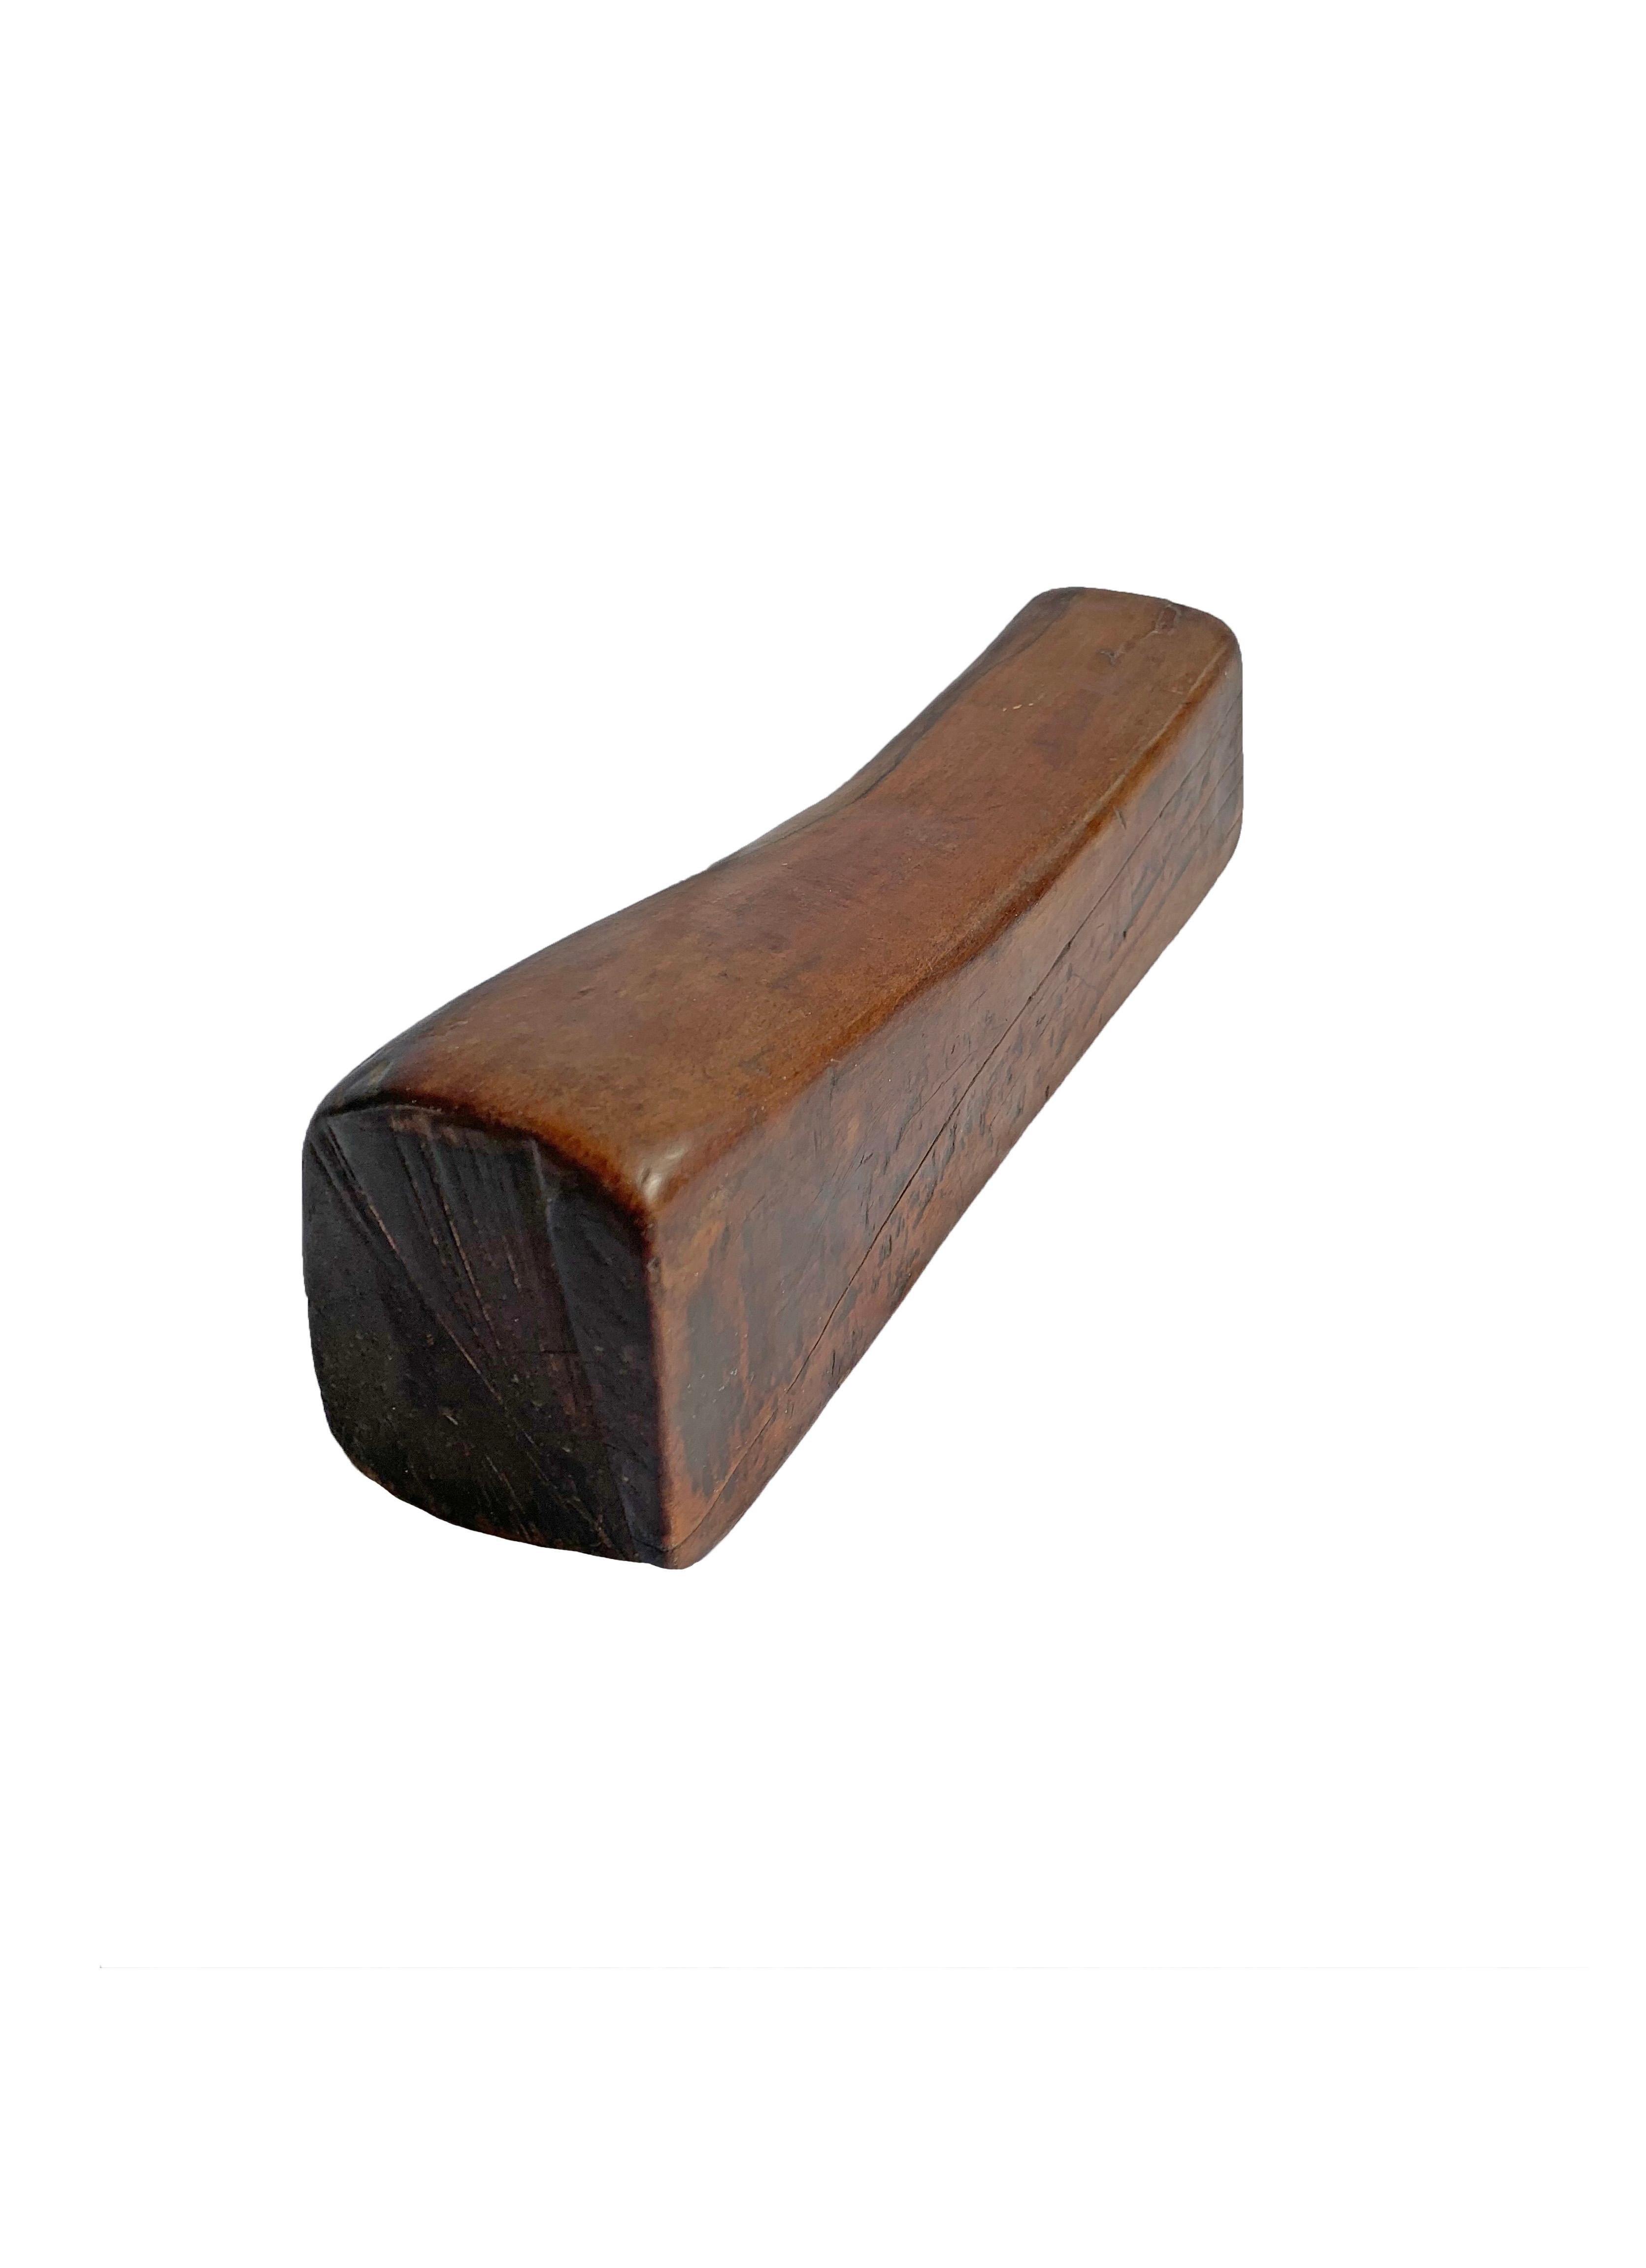 Other Chinese Elm Wood Headrest from Early 20th Century For Sale